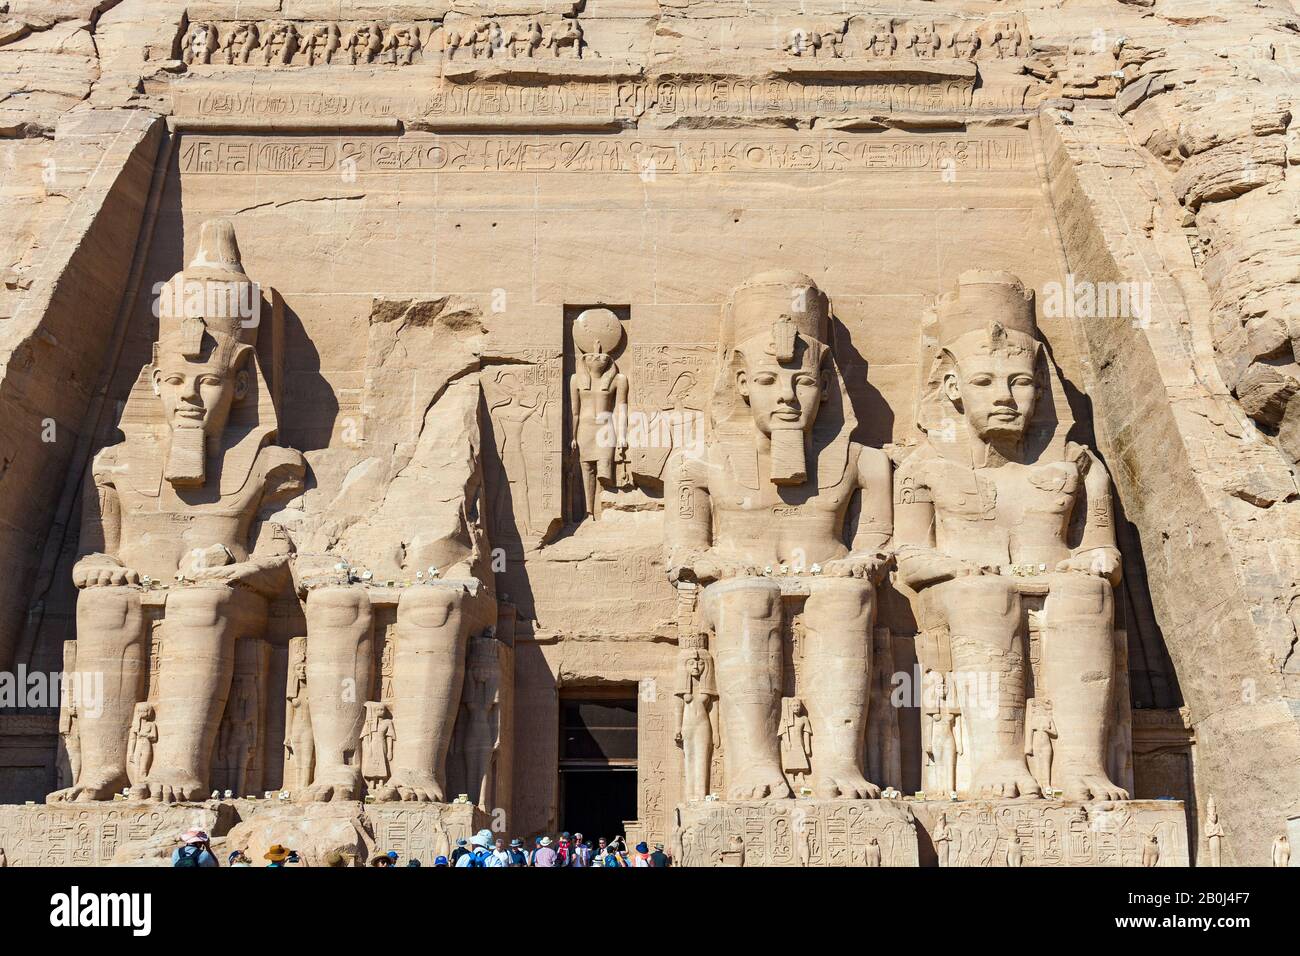 The Great Temple of Abu Simbel Stock Photo